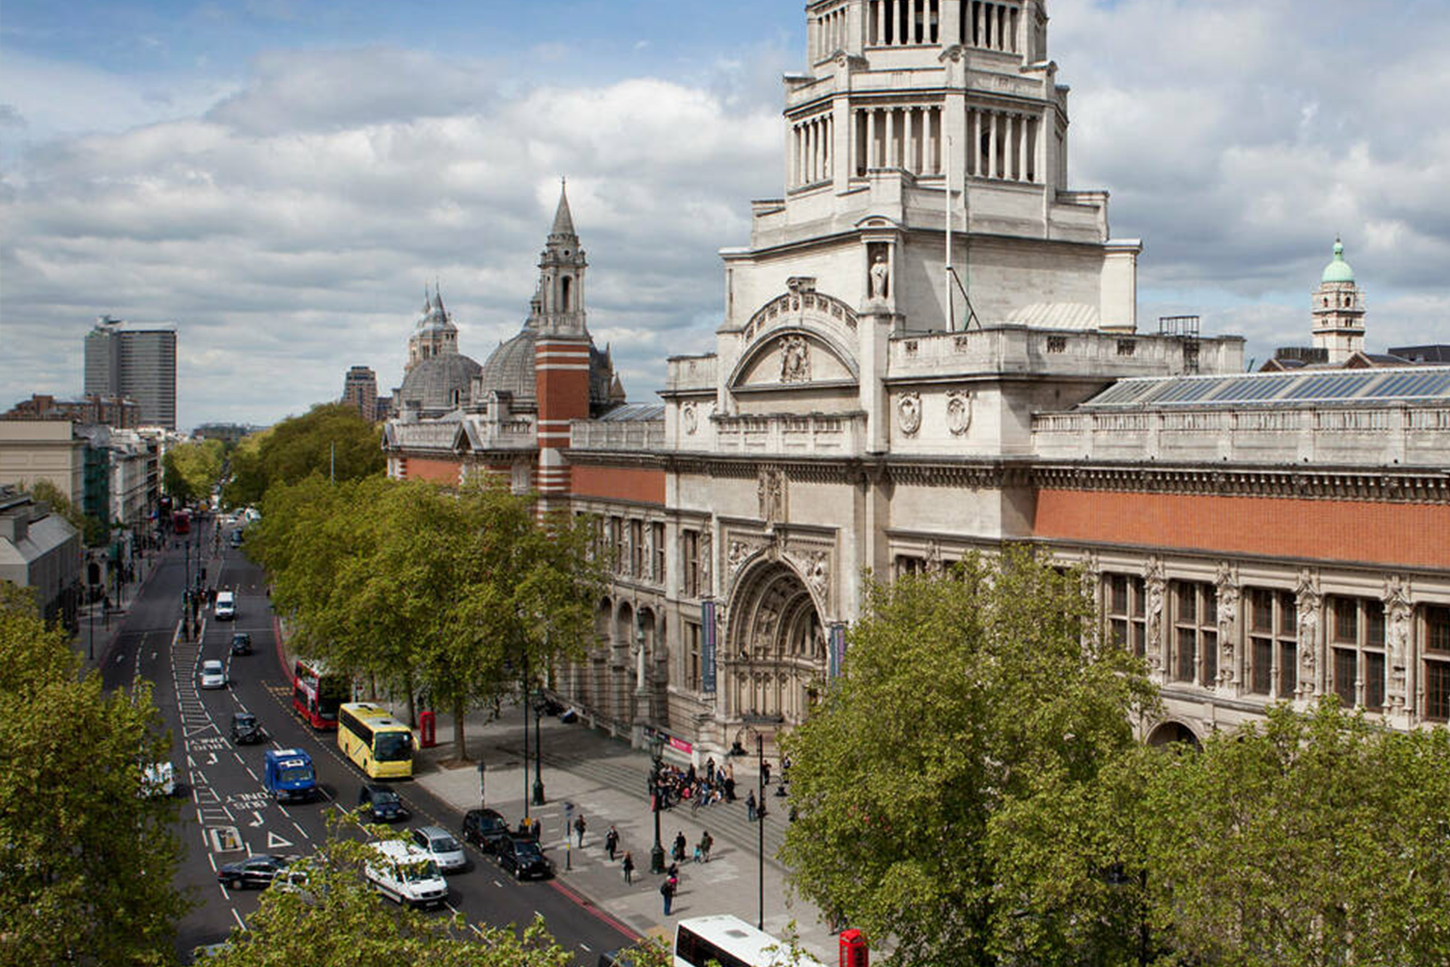 The exterior of the Victoria & Albert Museum, a grand white four-story building.